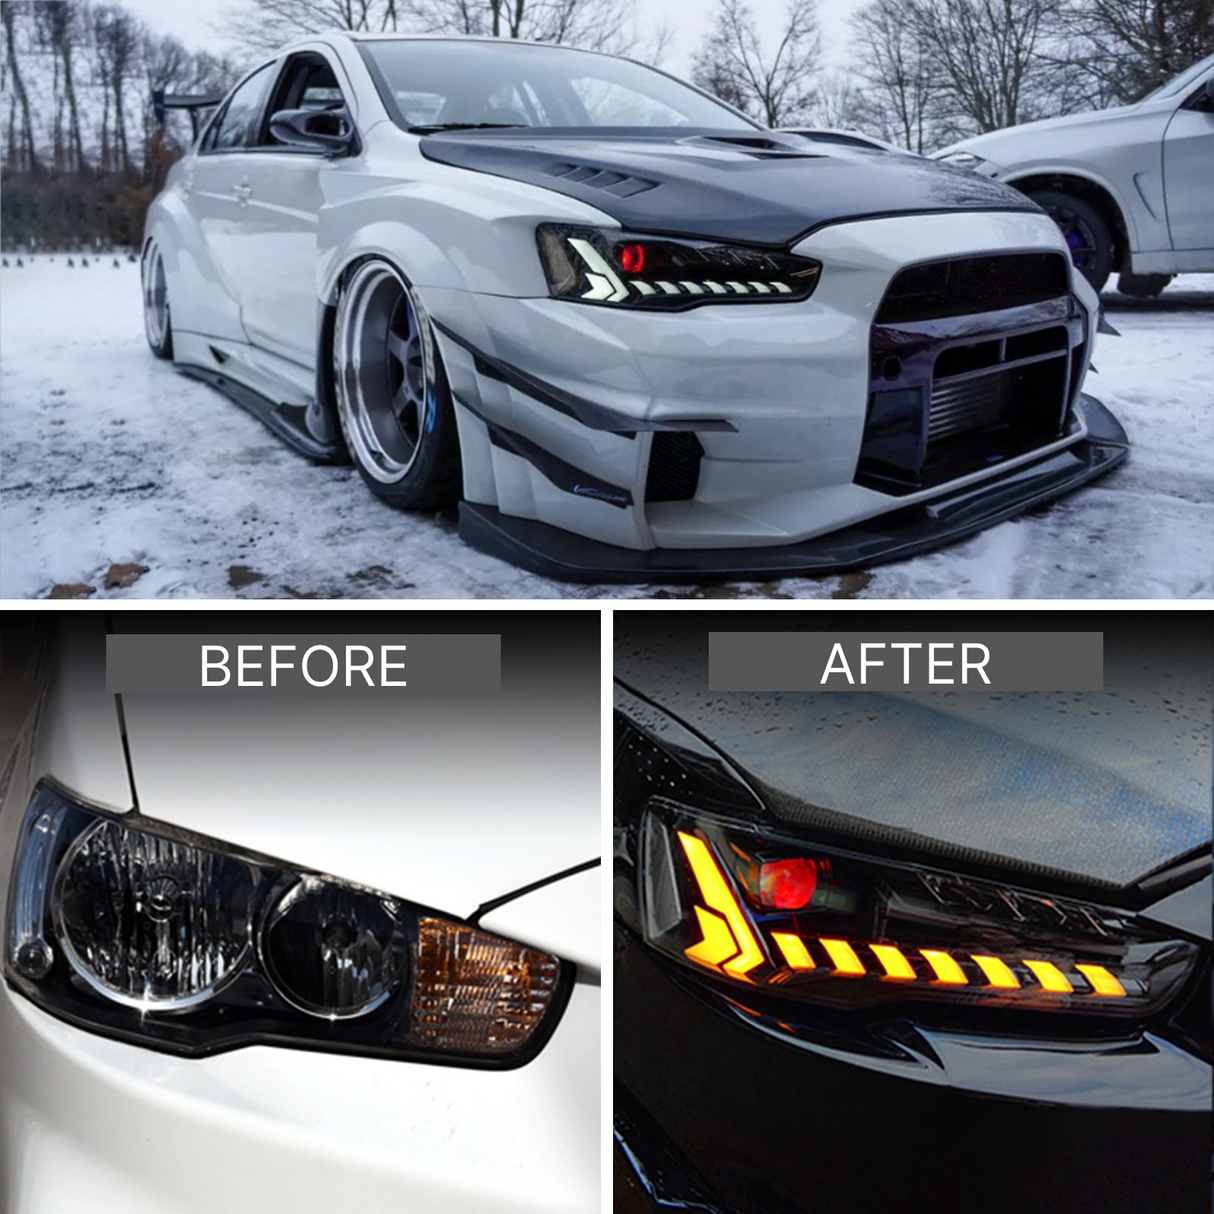 LED SEQUENTIAL HEADLIGHTS FOR MITSUBISHI LANCER EVO X